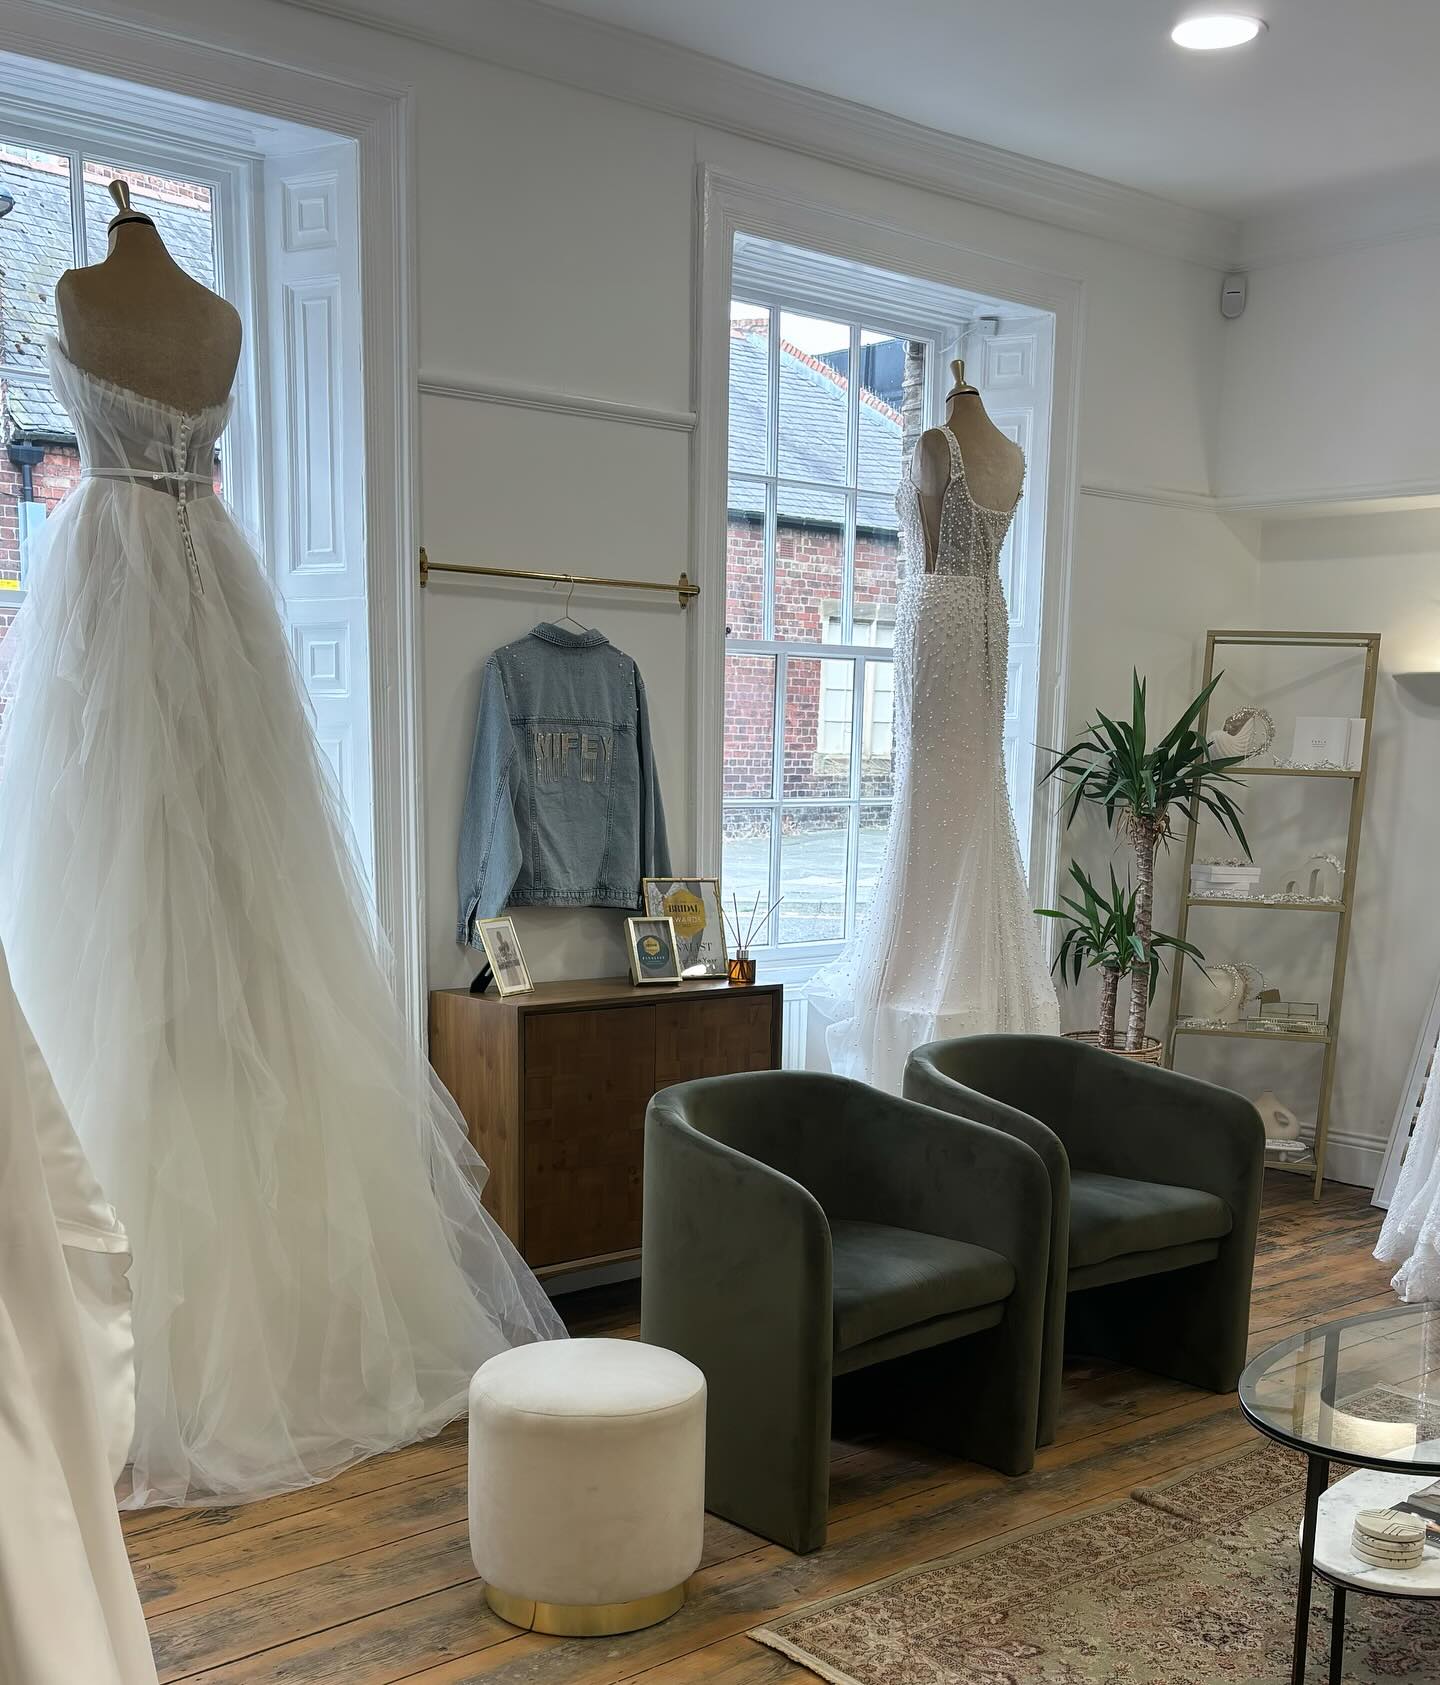 The @jeune_bridal takeover is in its final 24hours babe - this is the last chance for you to preview & order from next seasons designs ahead of time ◊Feedback has been unreal on these exquisite couture inspired designs & those of you celebrating your YES moments choosing from this dreamy edit - massive congrats again precious ones ◊ There’s still one or two last minute spots for a sneaky try on tomorrow before we send these beauties back on the road - book now via the link in our bio & don’t forget the booking system clocks out at midnight for next day appointments so be quick xo ◊ #youarepreciousbridal #bridalstudio #newcastlebride #bride #bridalgown #bridalinspo #weddingdress #bride2025 #2025bride #bride2026 #bridalstyle #stylishbride  #bohobride #modernbride #yestothedress #youarepreciousloves #dressoftheday #isaidyes #weddingdressgoals #dressgoals #dreamweddingdress #designerbridal #elegantwedding